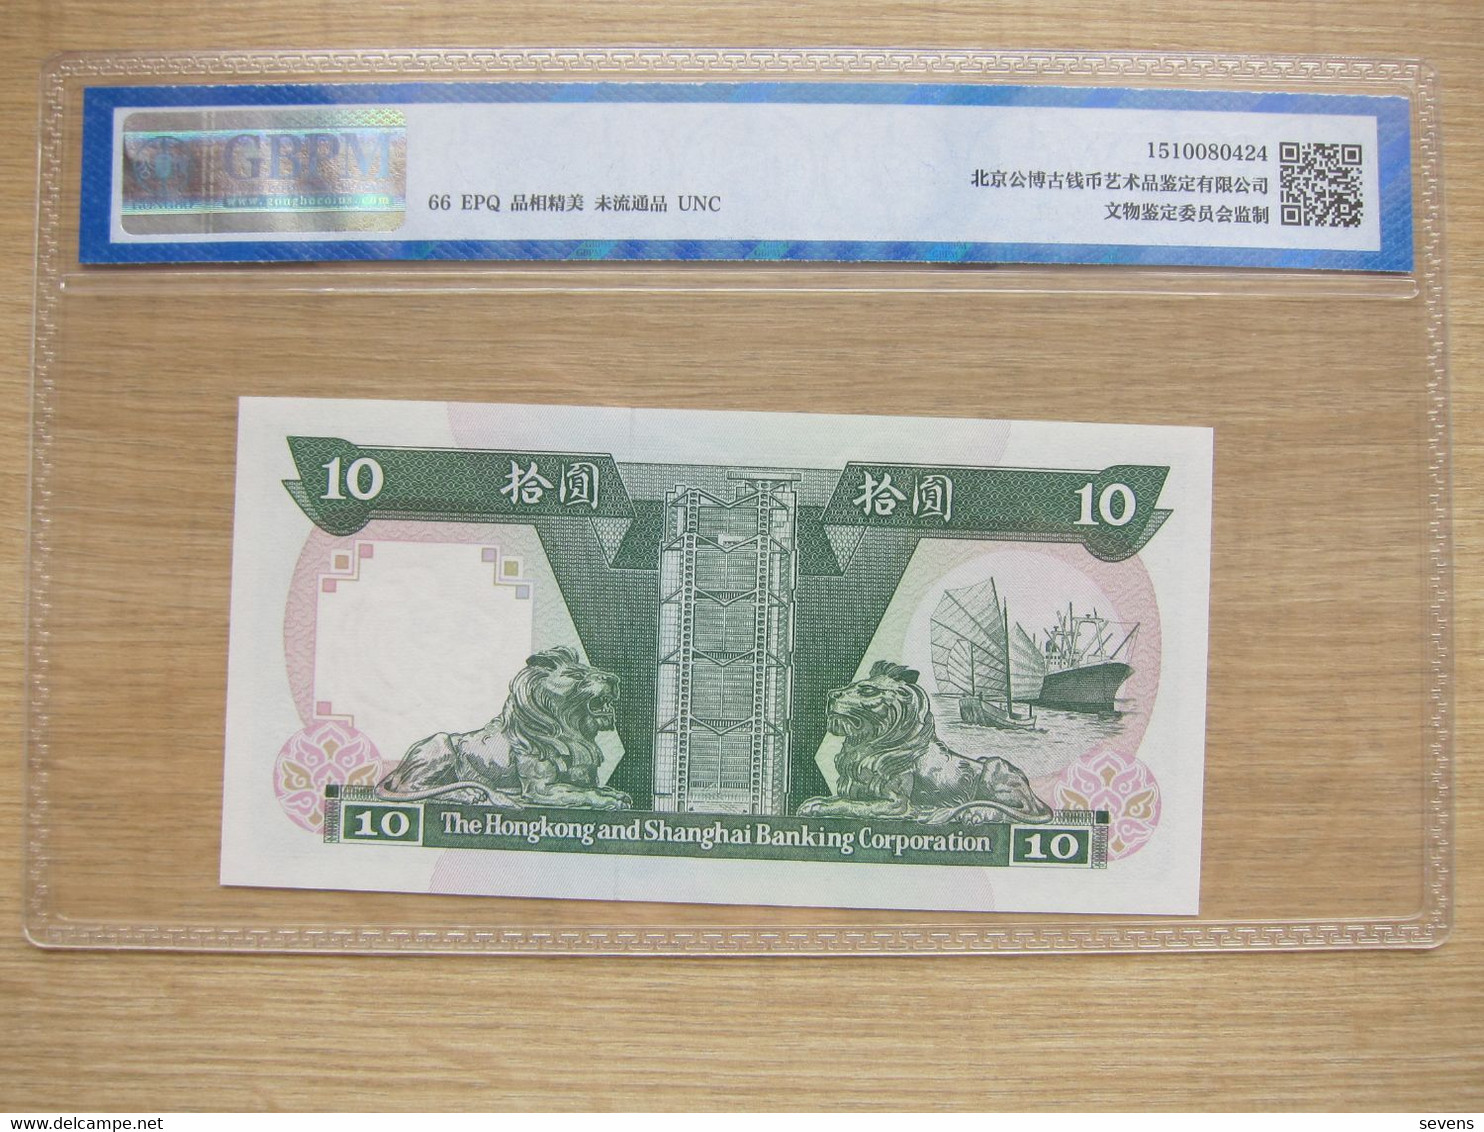 Hong Kong H&S Banking Corp. 1992 Ten Dollar Banknote, Gongbo Paper Money Guaranty UNC EPQ66, Packed - Autres - Asie